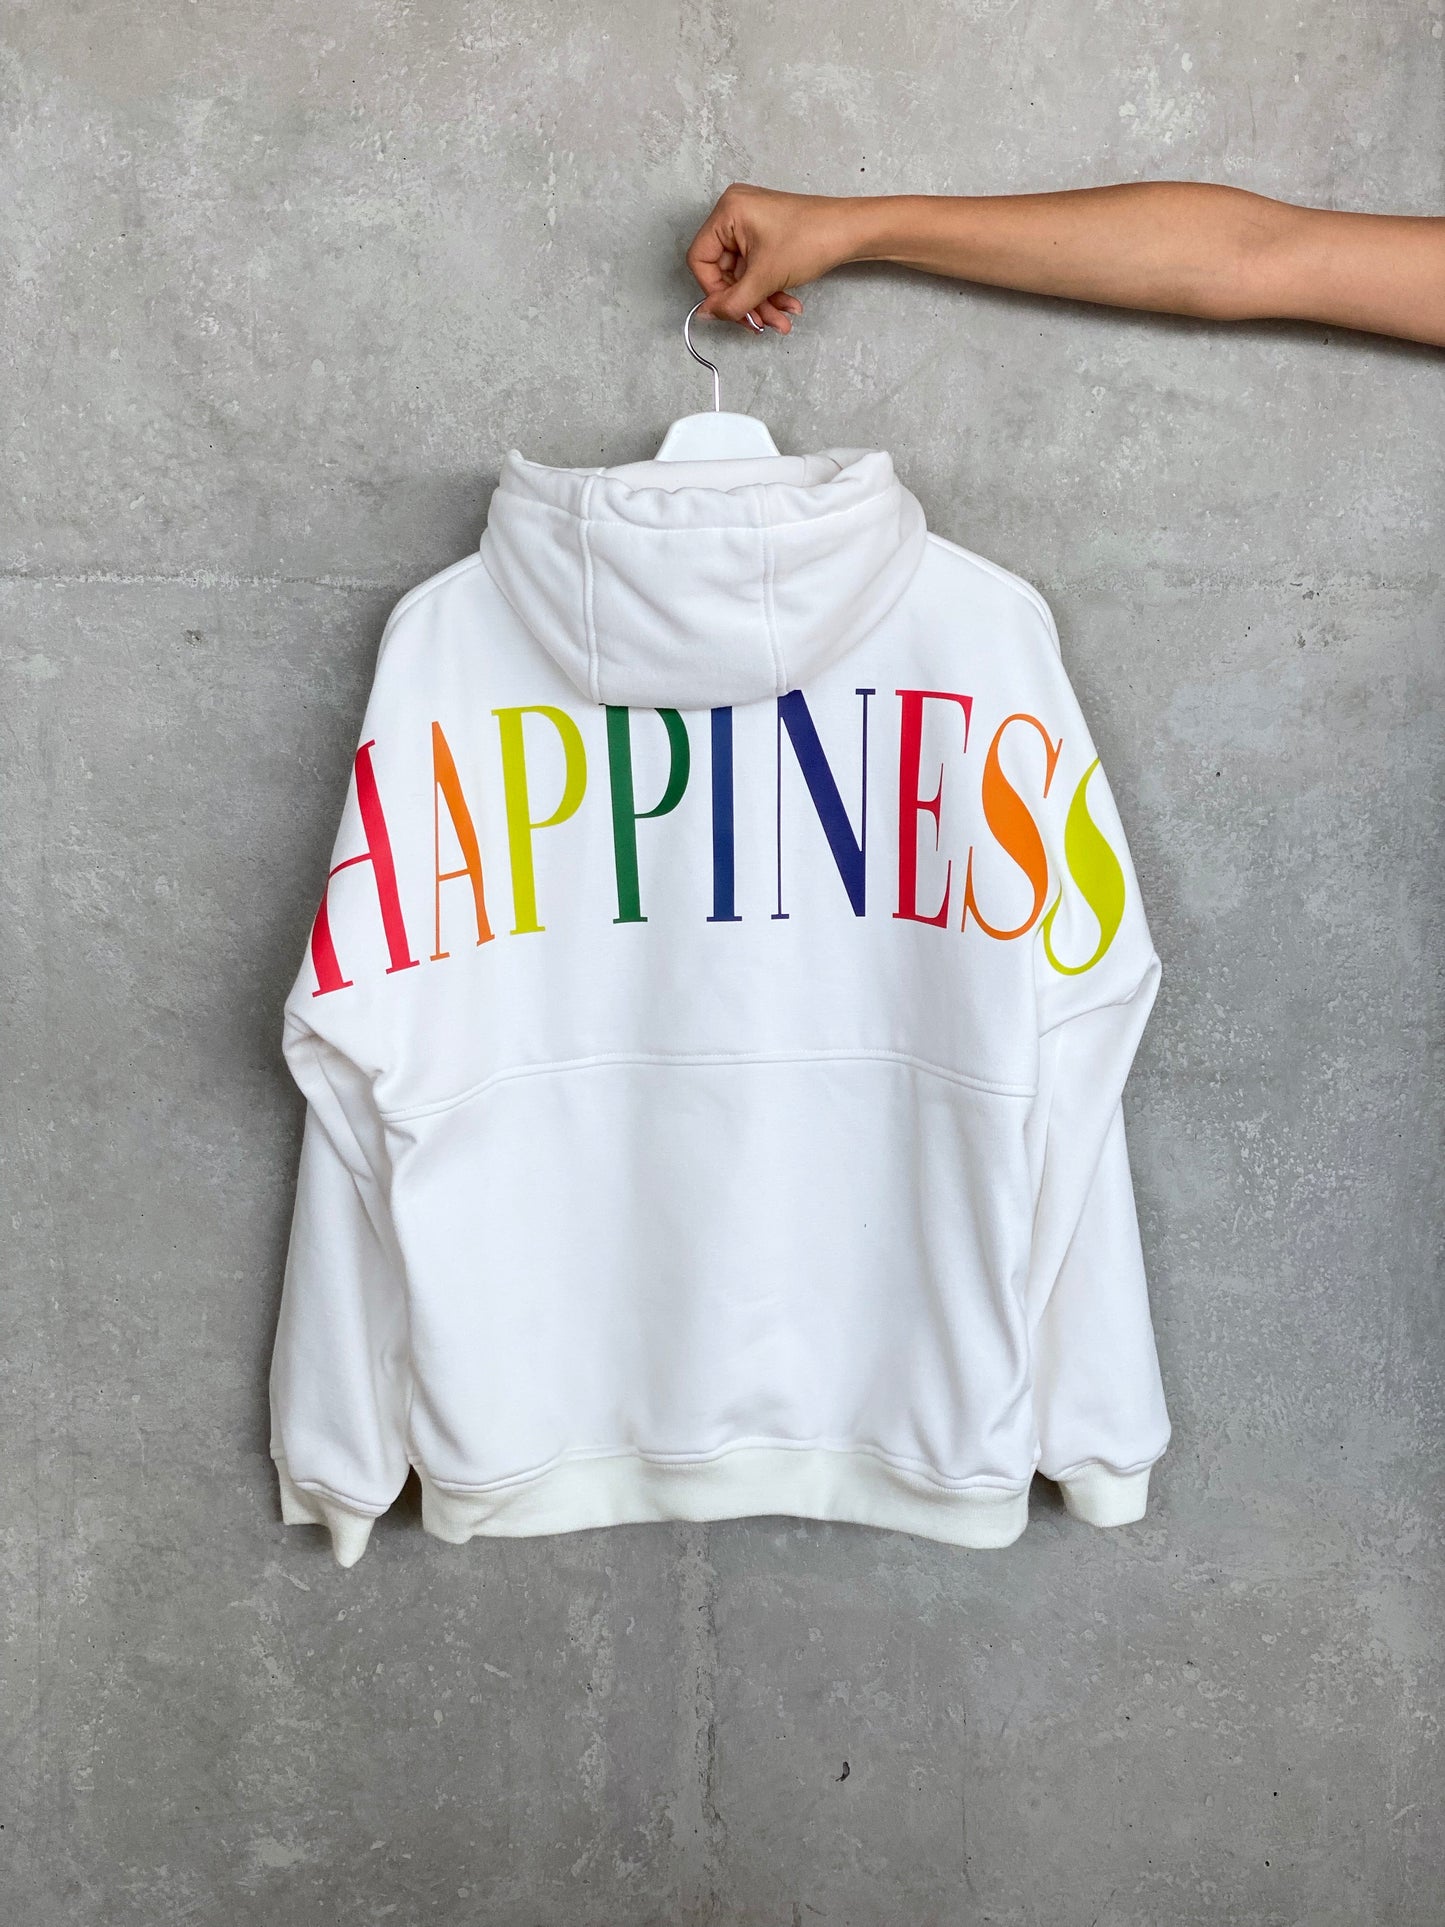 Perfecto Imperfecto Hoodie Hapiness Talla S/M #140